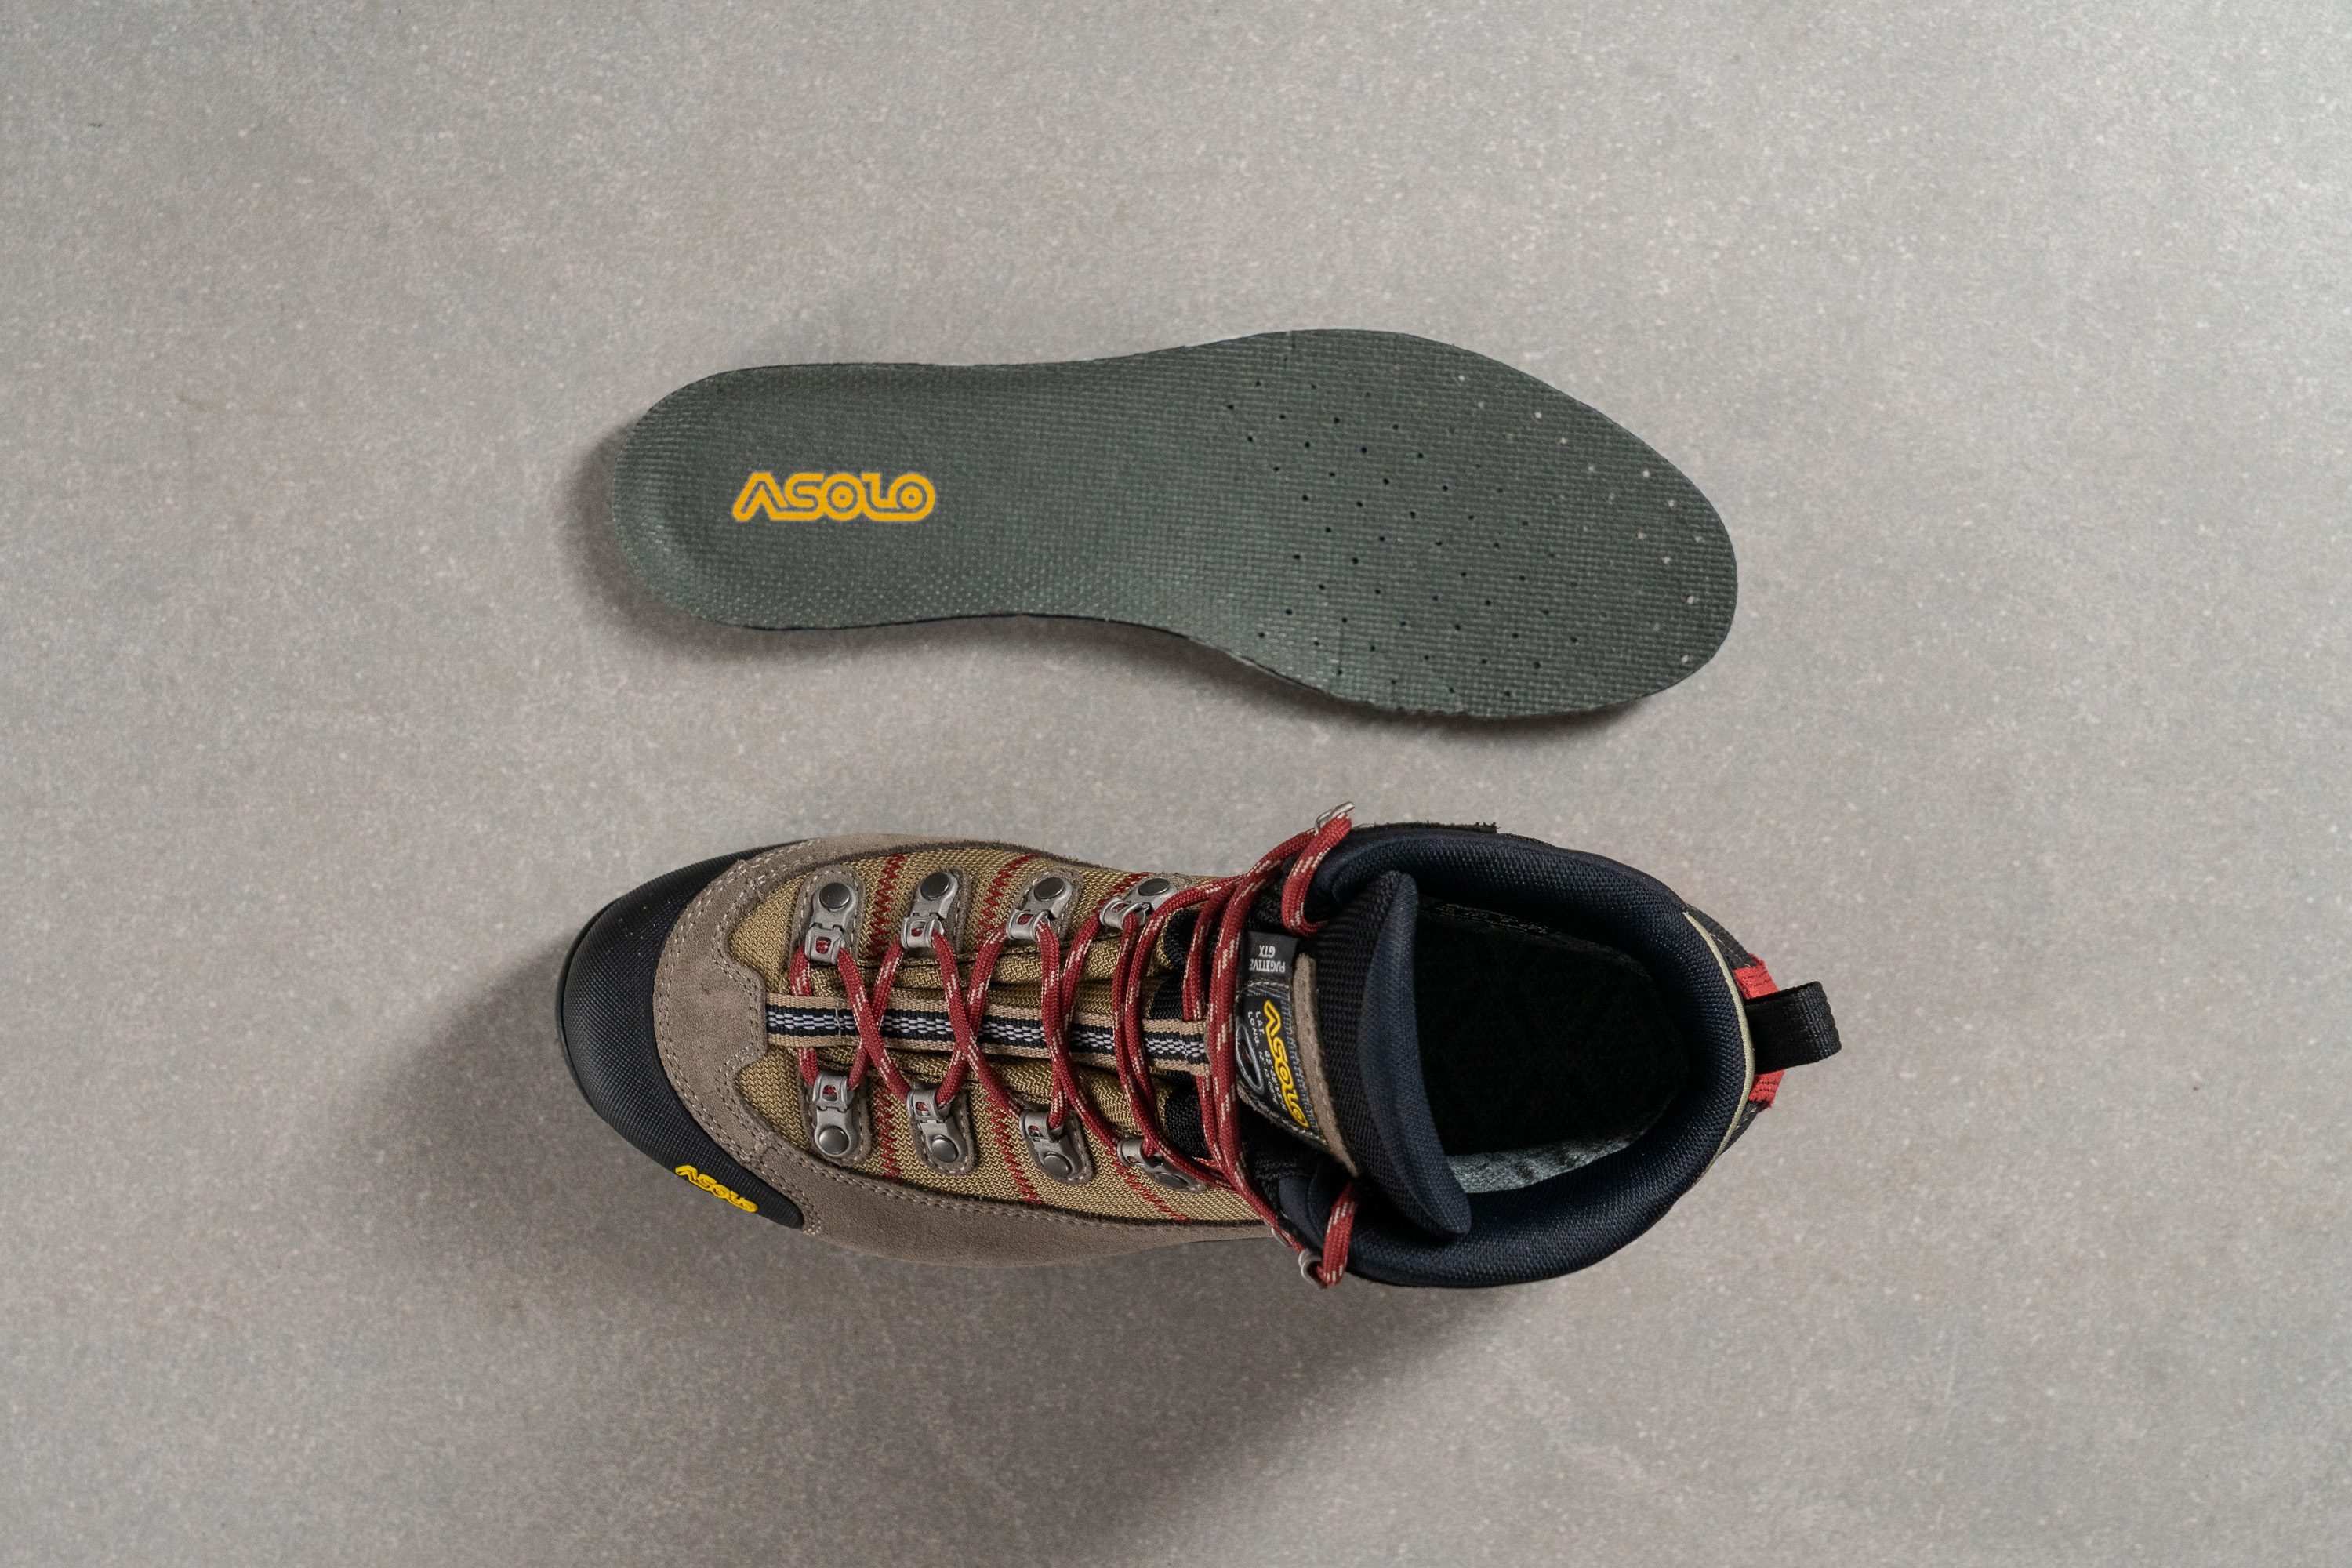 oz / 655g Removable insole